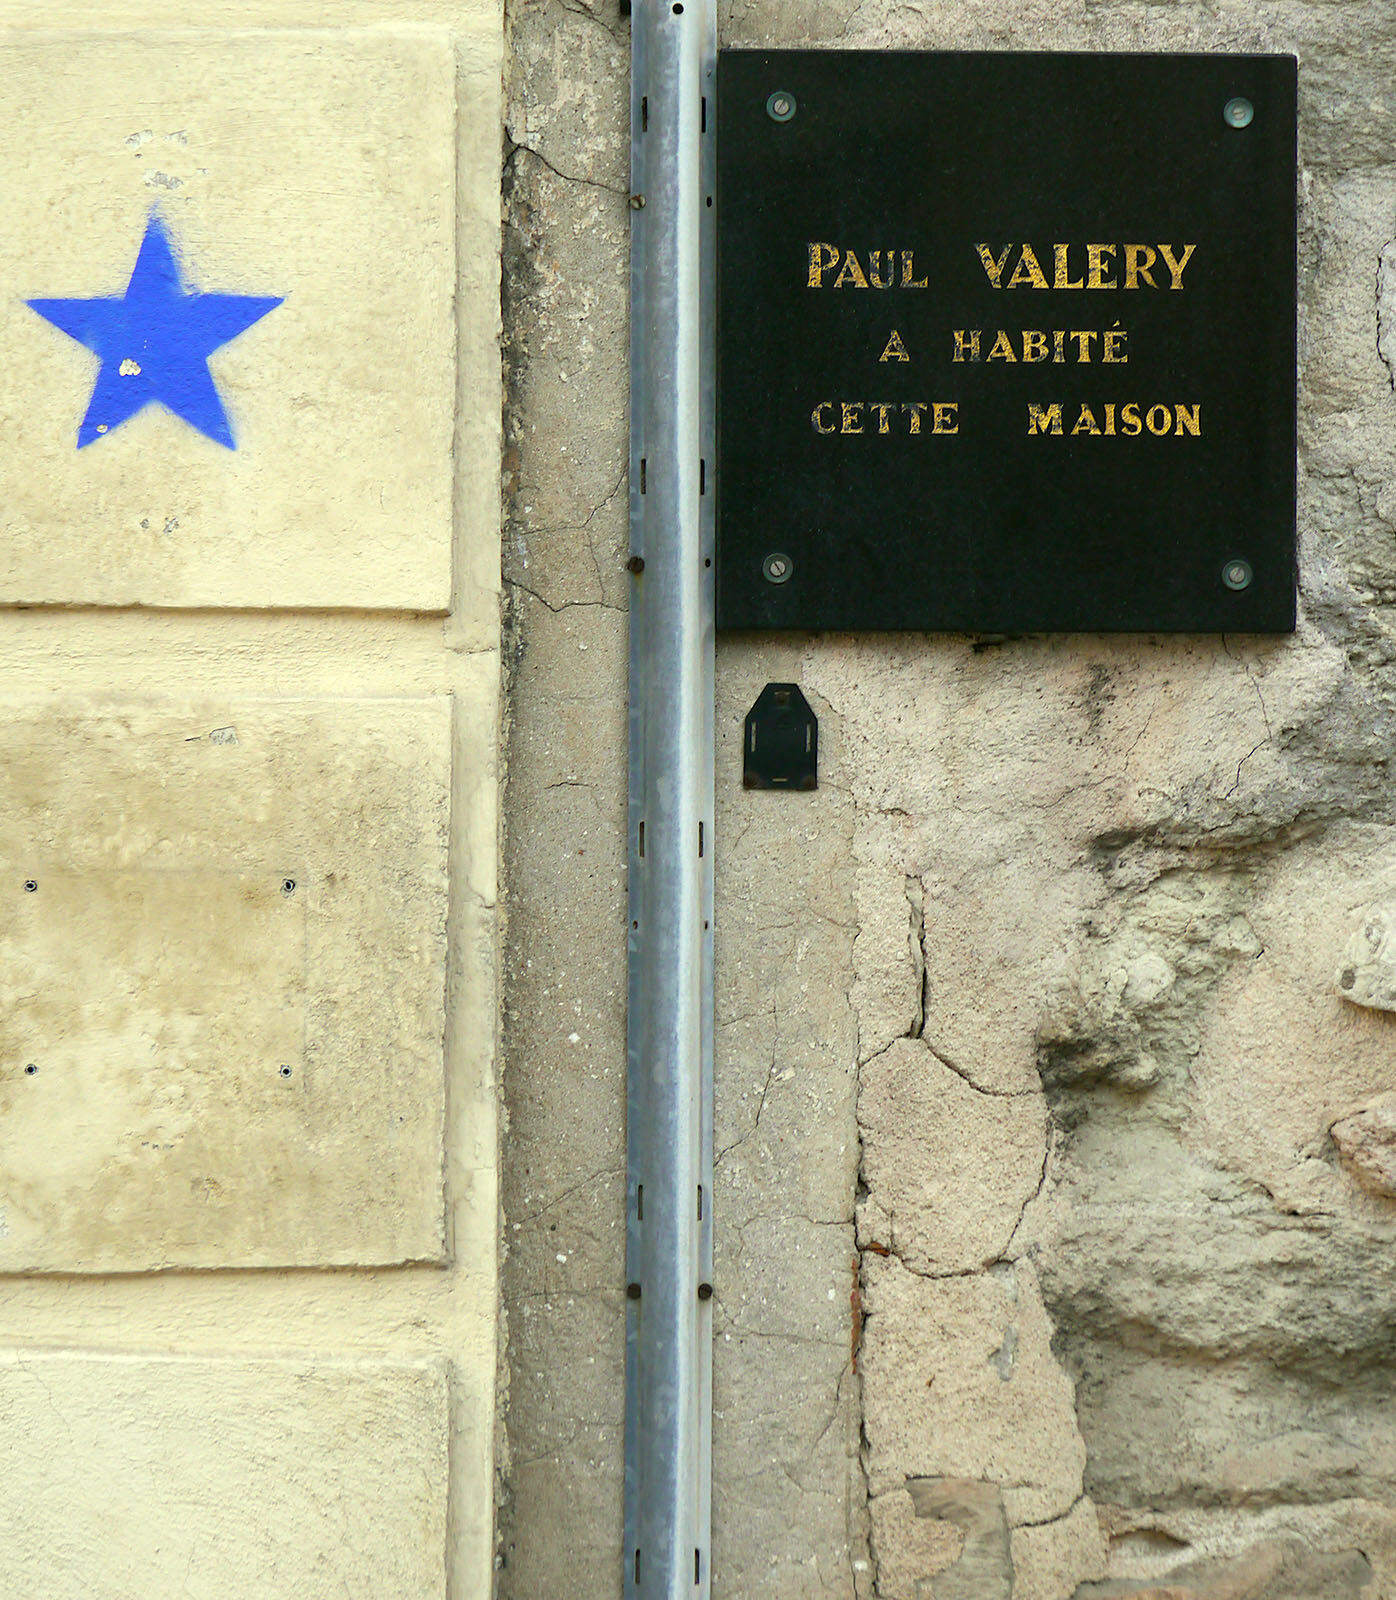 Door to the former home of poet Paul Valéry